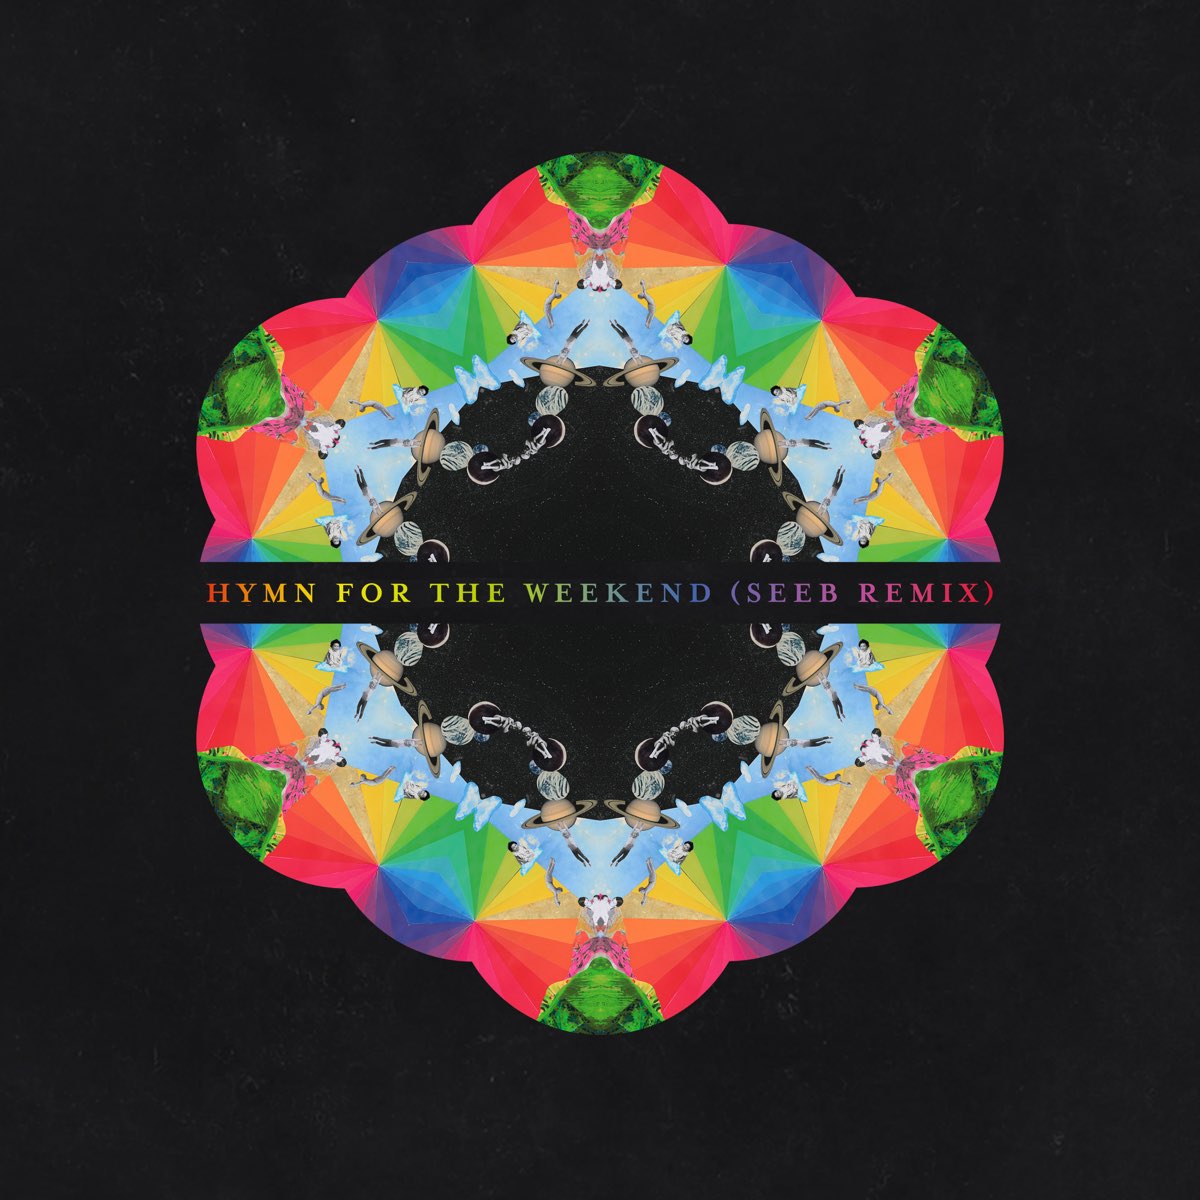 Live for the weekend. Колдплей обложка Hymn. Coldplay Hymn for the weekend. Бейонсе Coldplay Hymn for the weekend. Колдплей Веекенд.